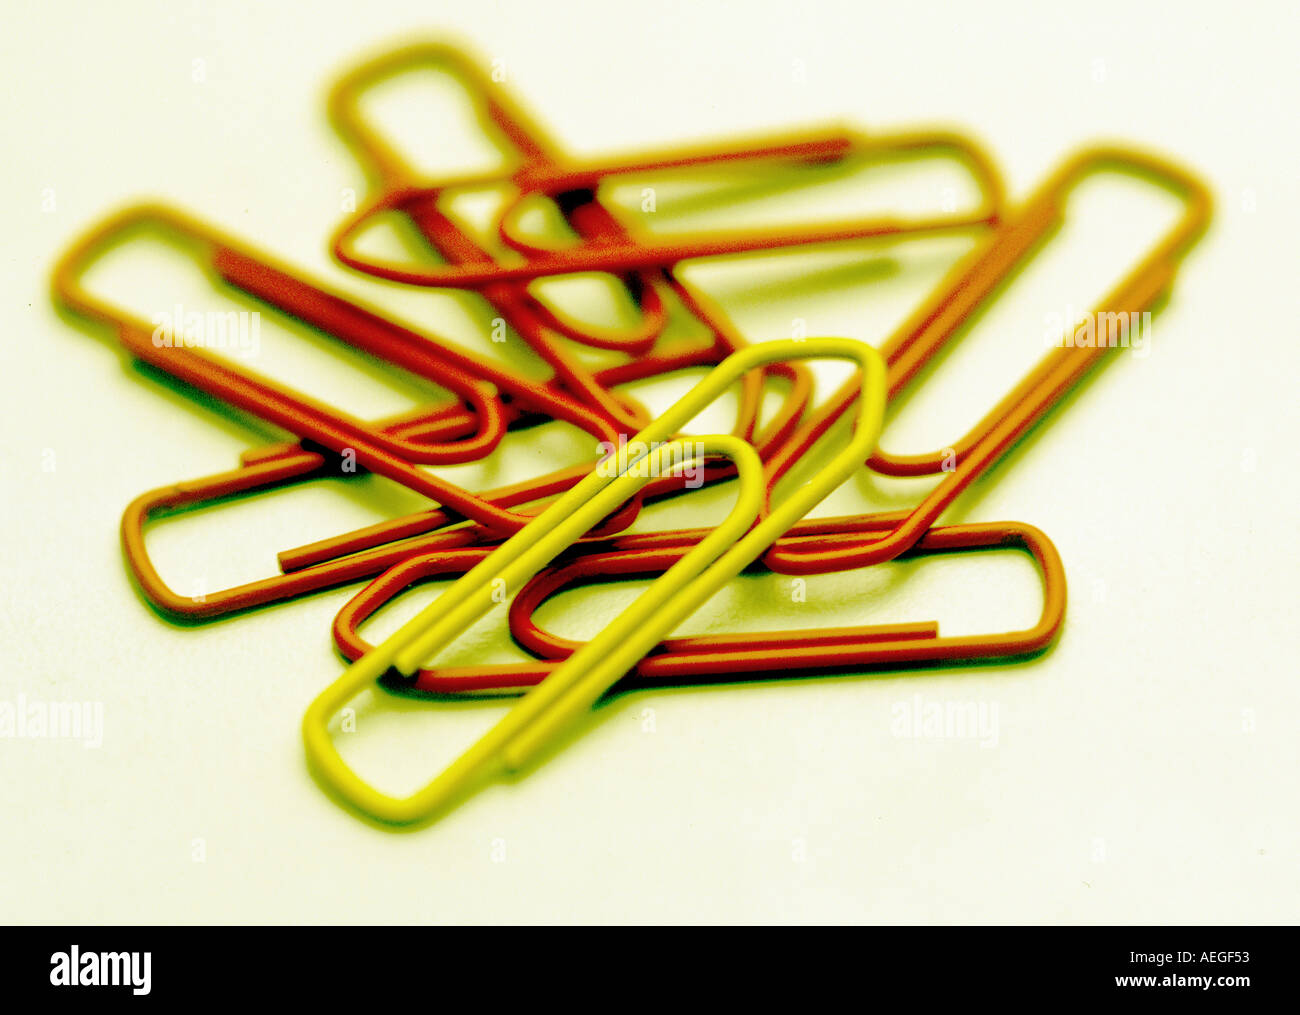 Office paperclips paperclip metallic few contrasty yellow red Stock Photo